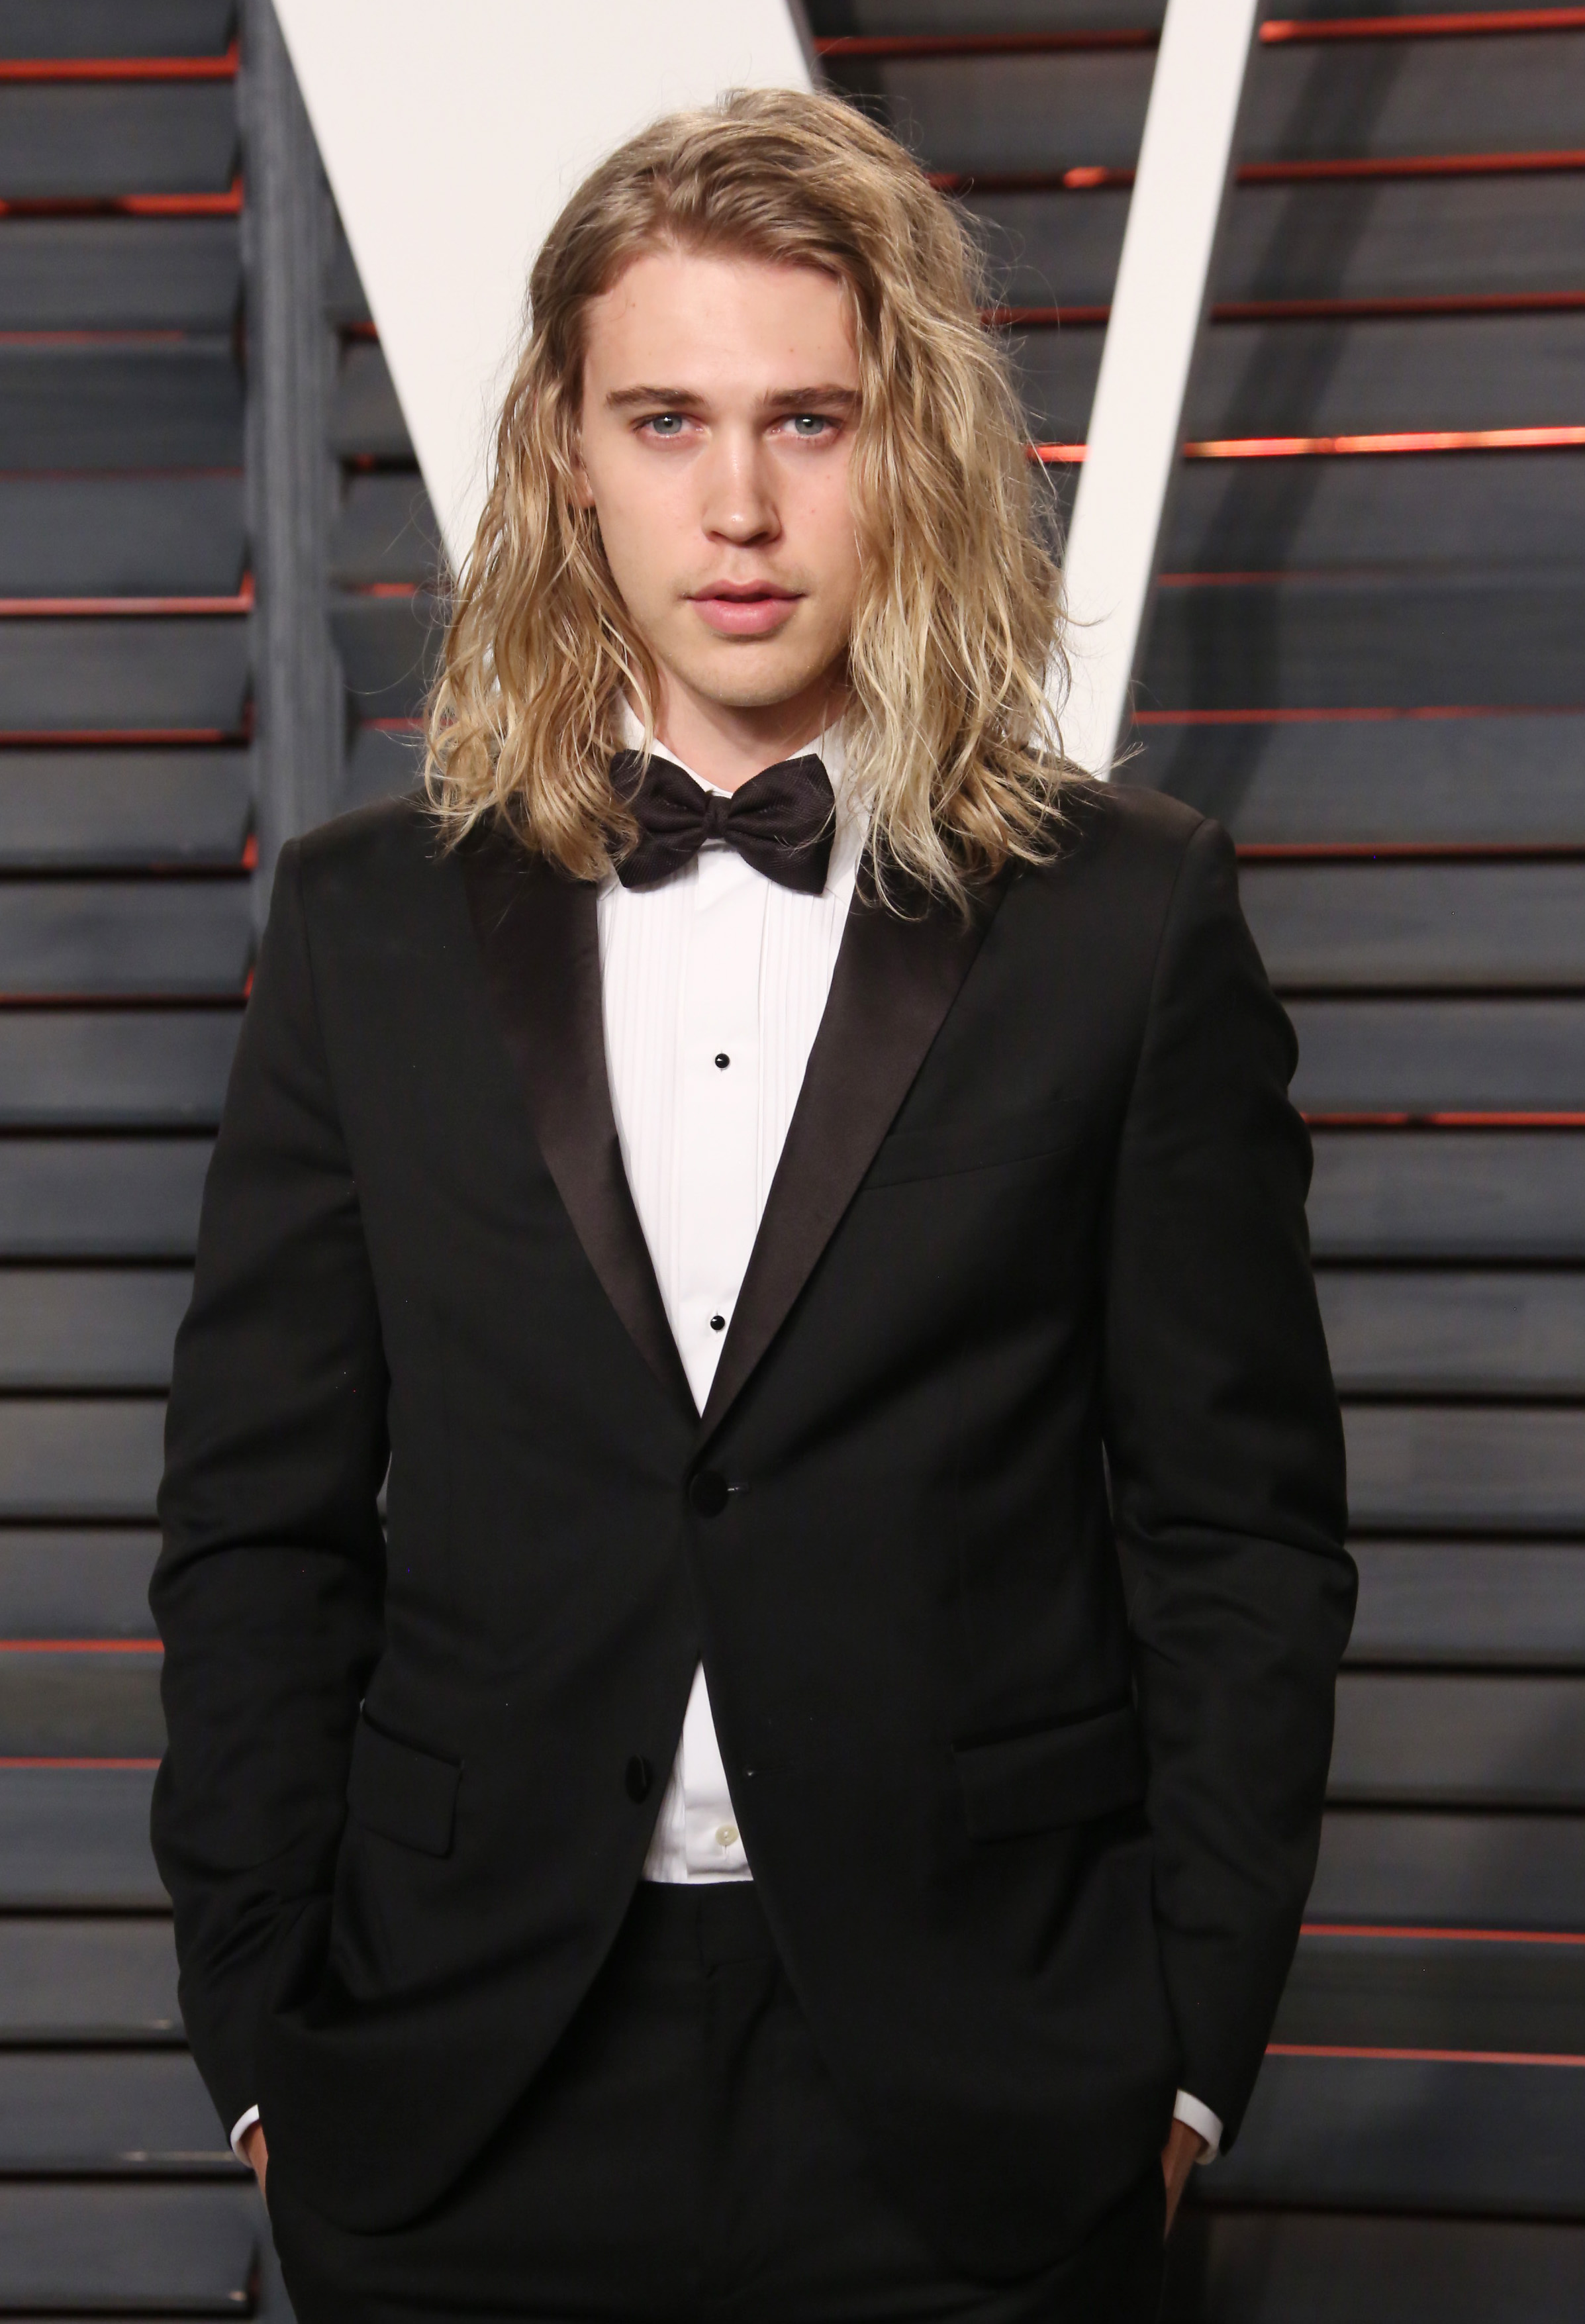 Did Austin Butler Ever Get Plastic Surgery? Quotes, Photos | Life & Style